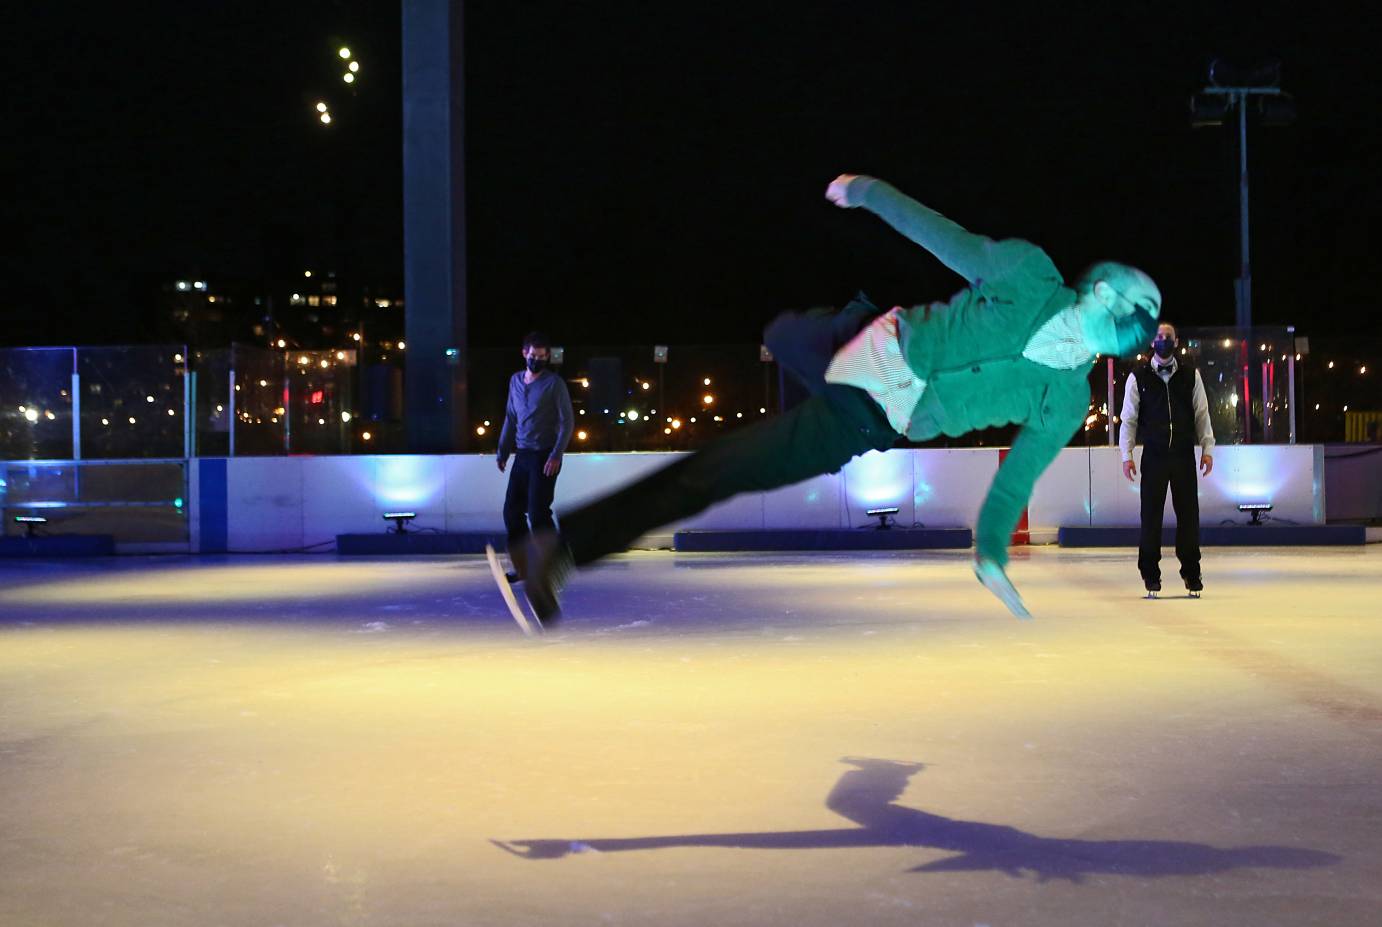 A man in a green cardigan shoots off the ice, his body is slanted, his arms and legs extended in relaxed Vs. Two other men stand behind him motionless